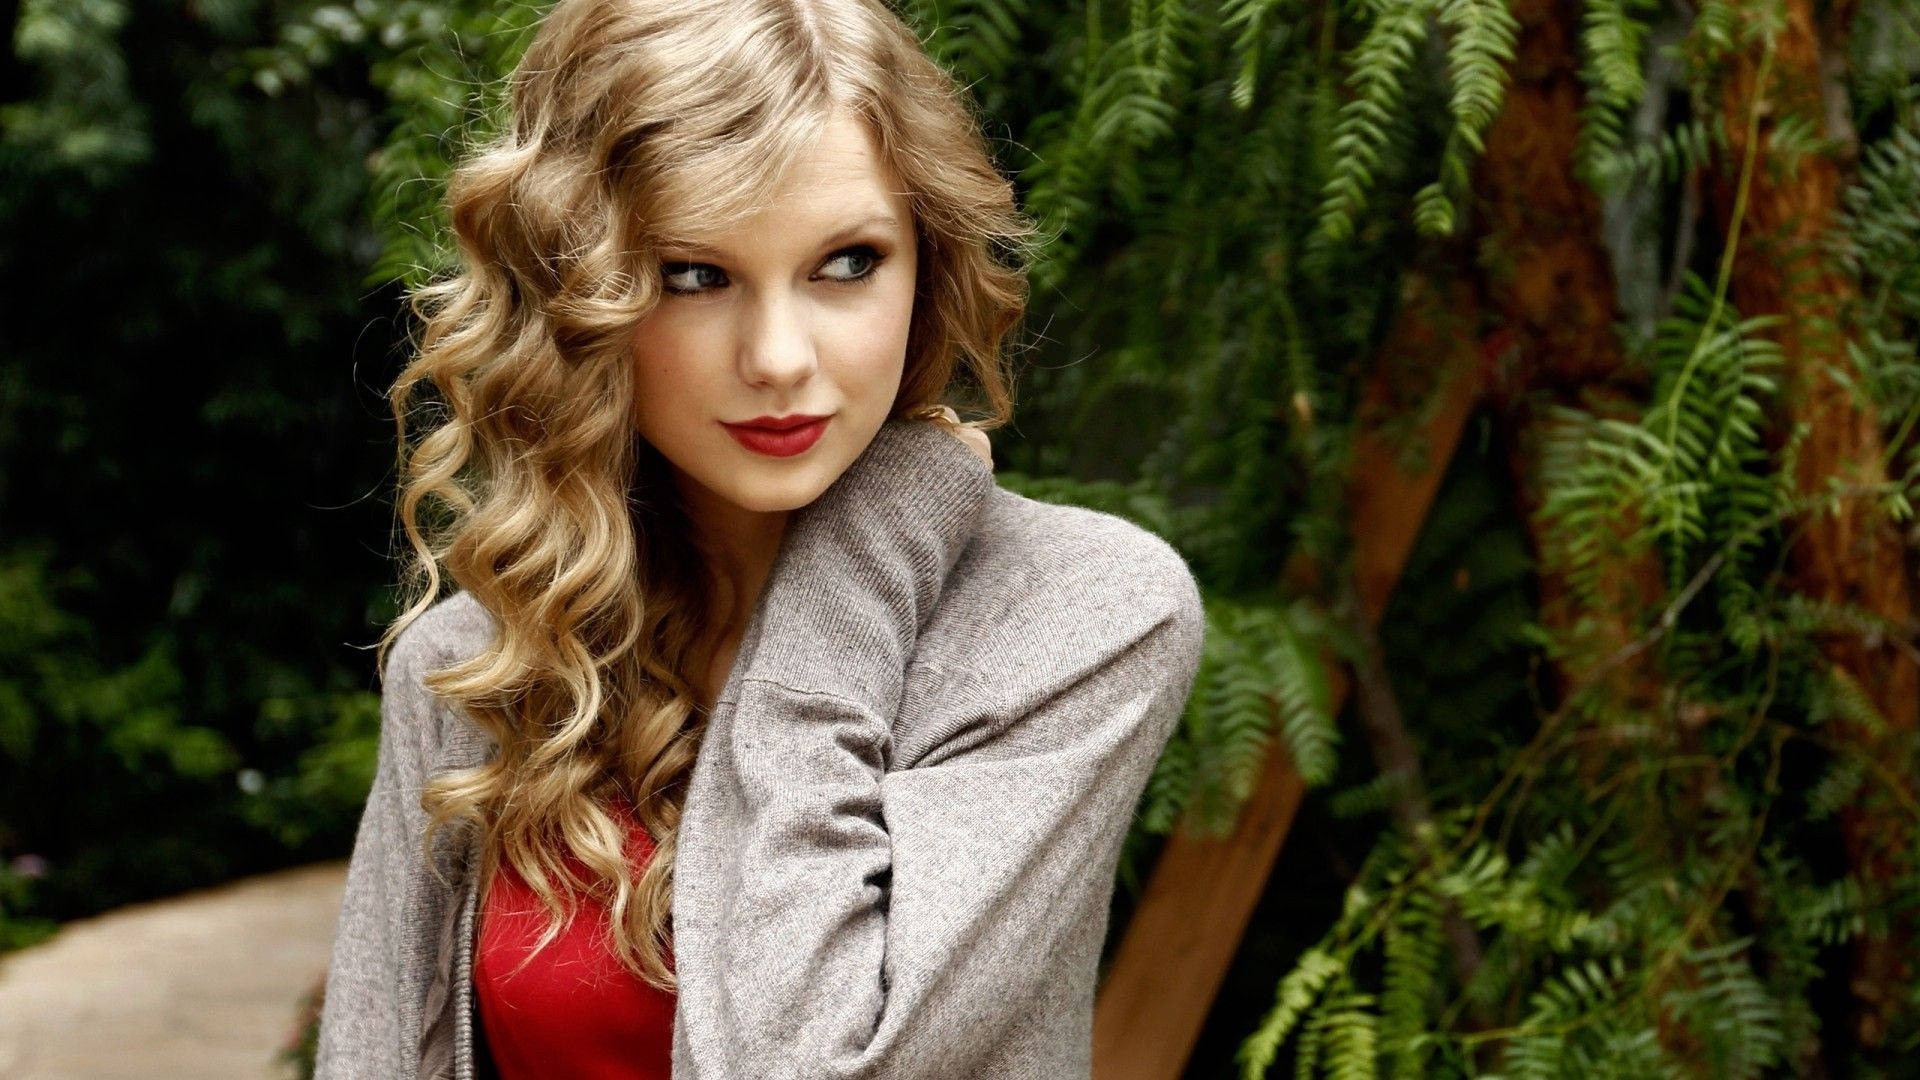 Taylor Swift Poses with a Side Glance Wallpaper